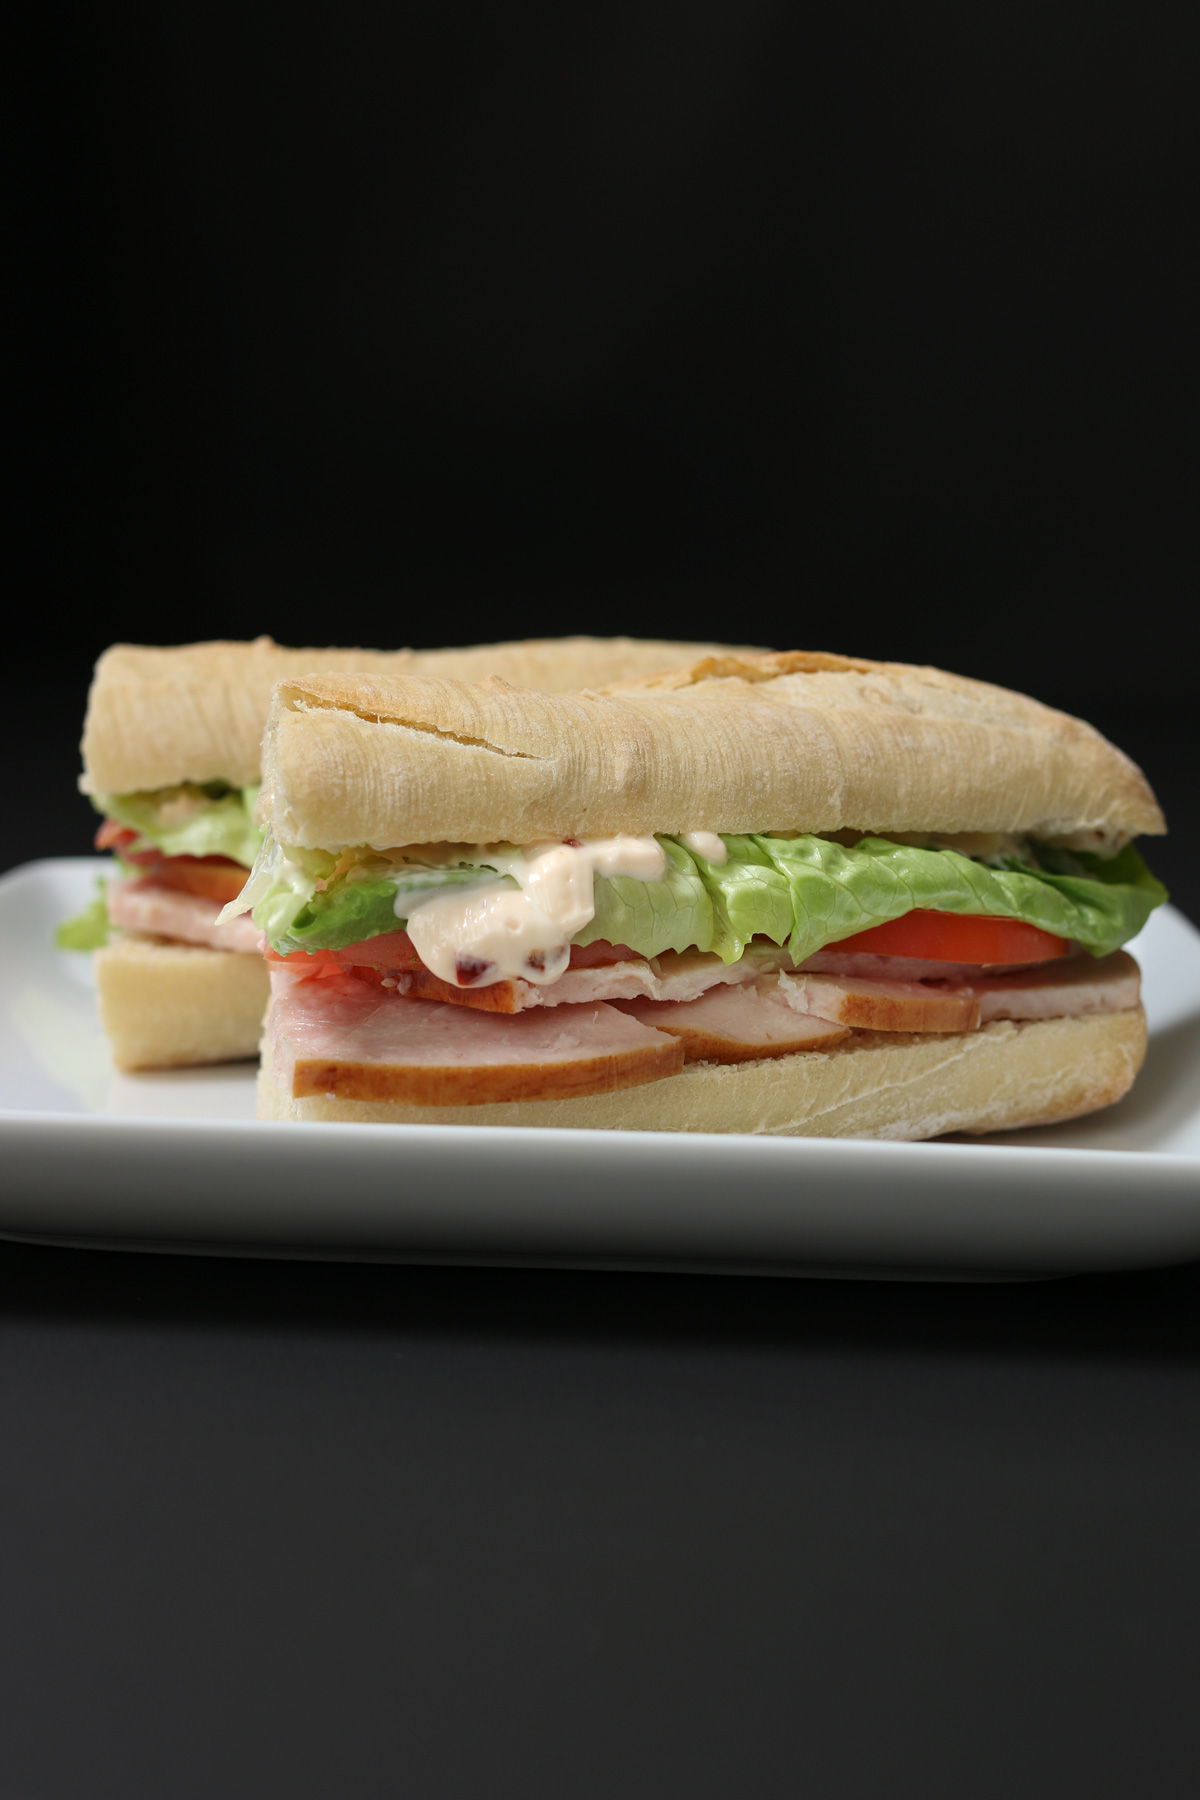 two portions of turkey baguette sandwich on white square plate with black background.